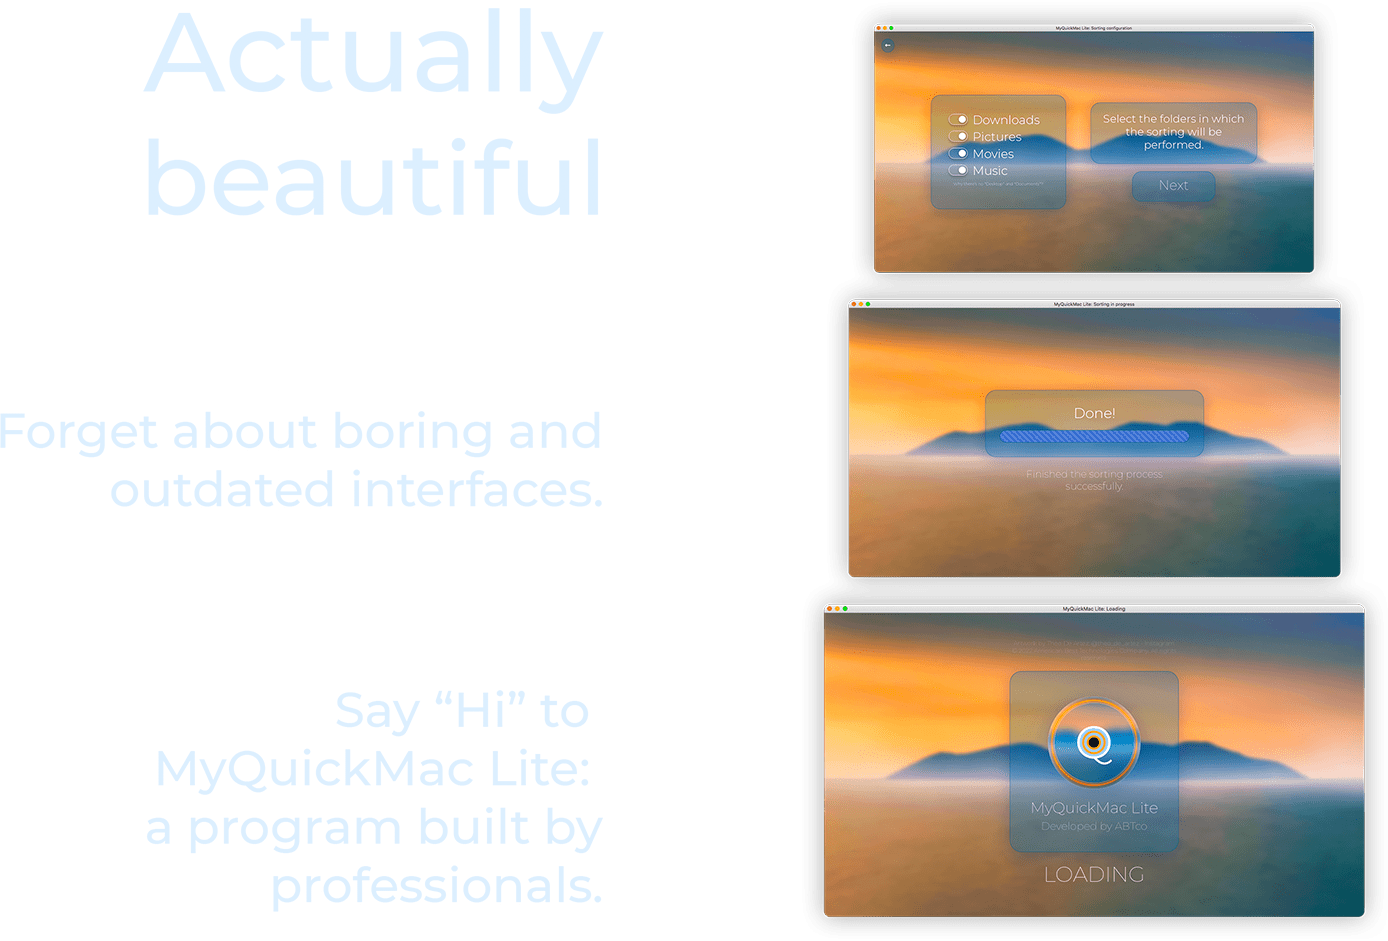 Actually Beautiful: Forget about boring and outdated interfaces. Say 'hi' to MyQuickMac Lite - a program built by professionals. Shows three MyQuickMac Lite windows - scan configuration, scan completed, and loading windows.